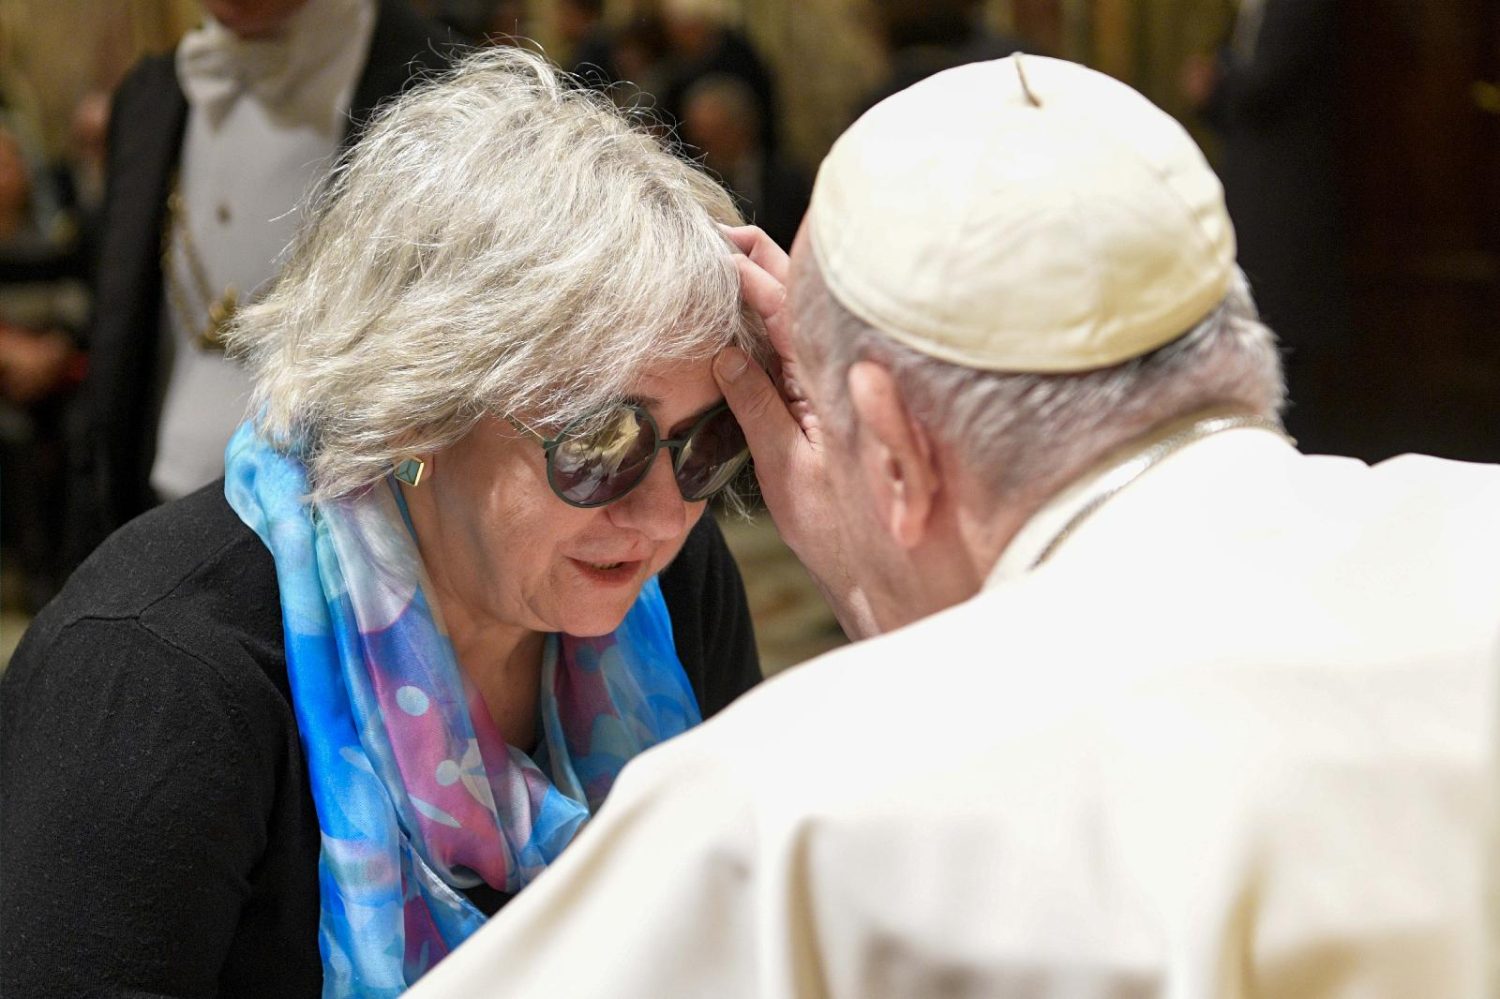 Read more about the article Physical vulnerability can be a resource for society, the church, pope says